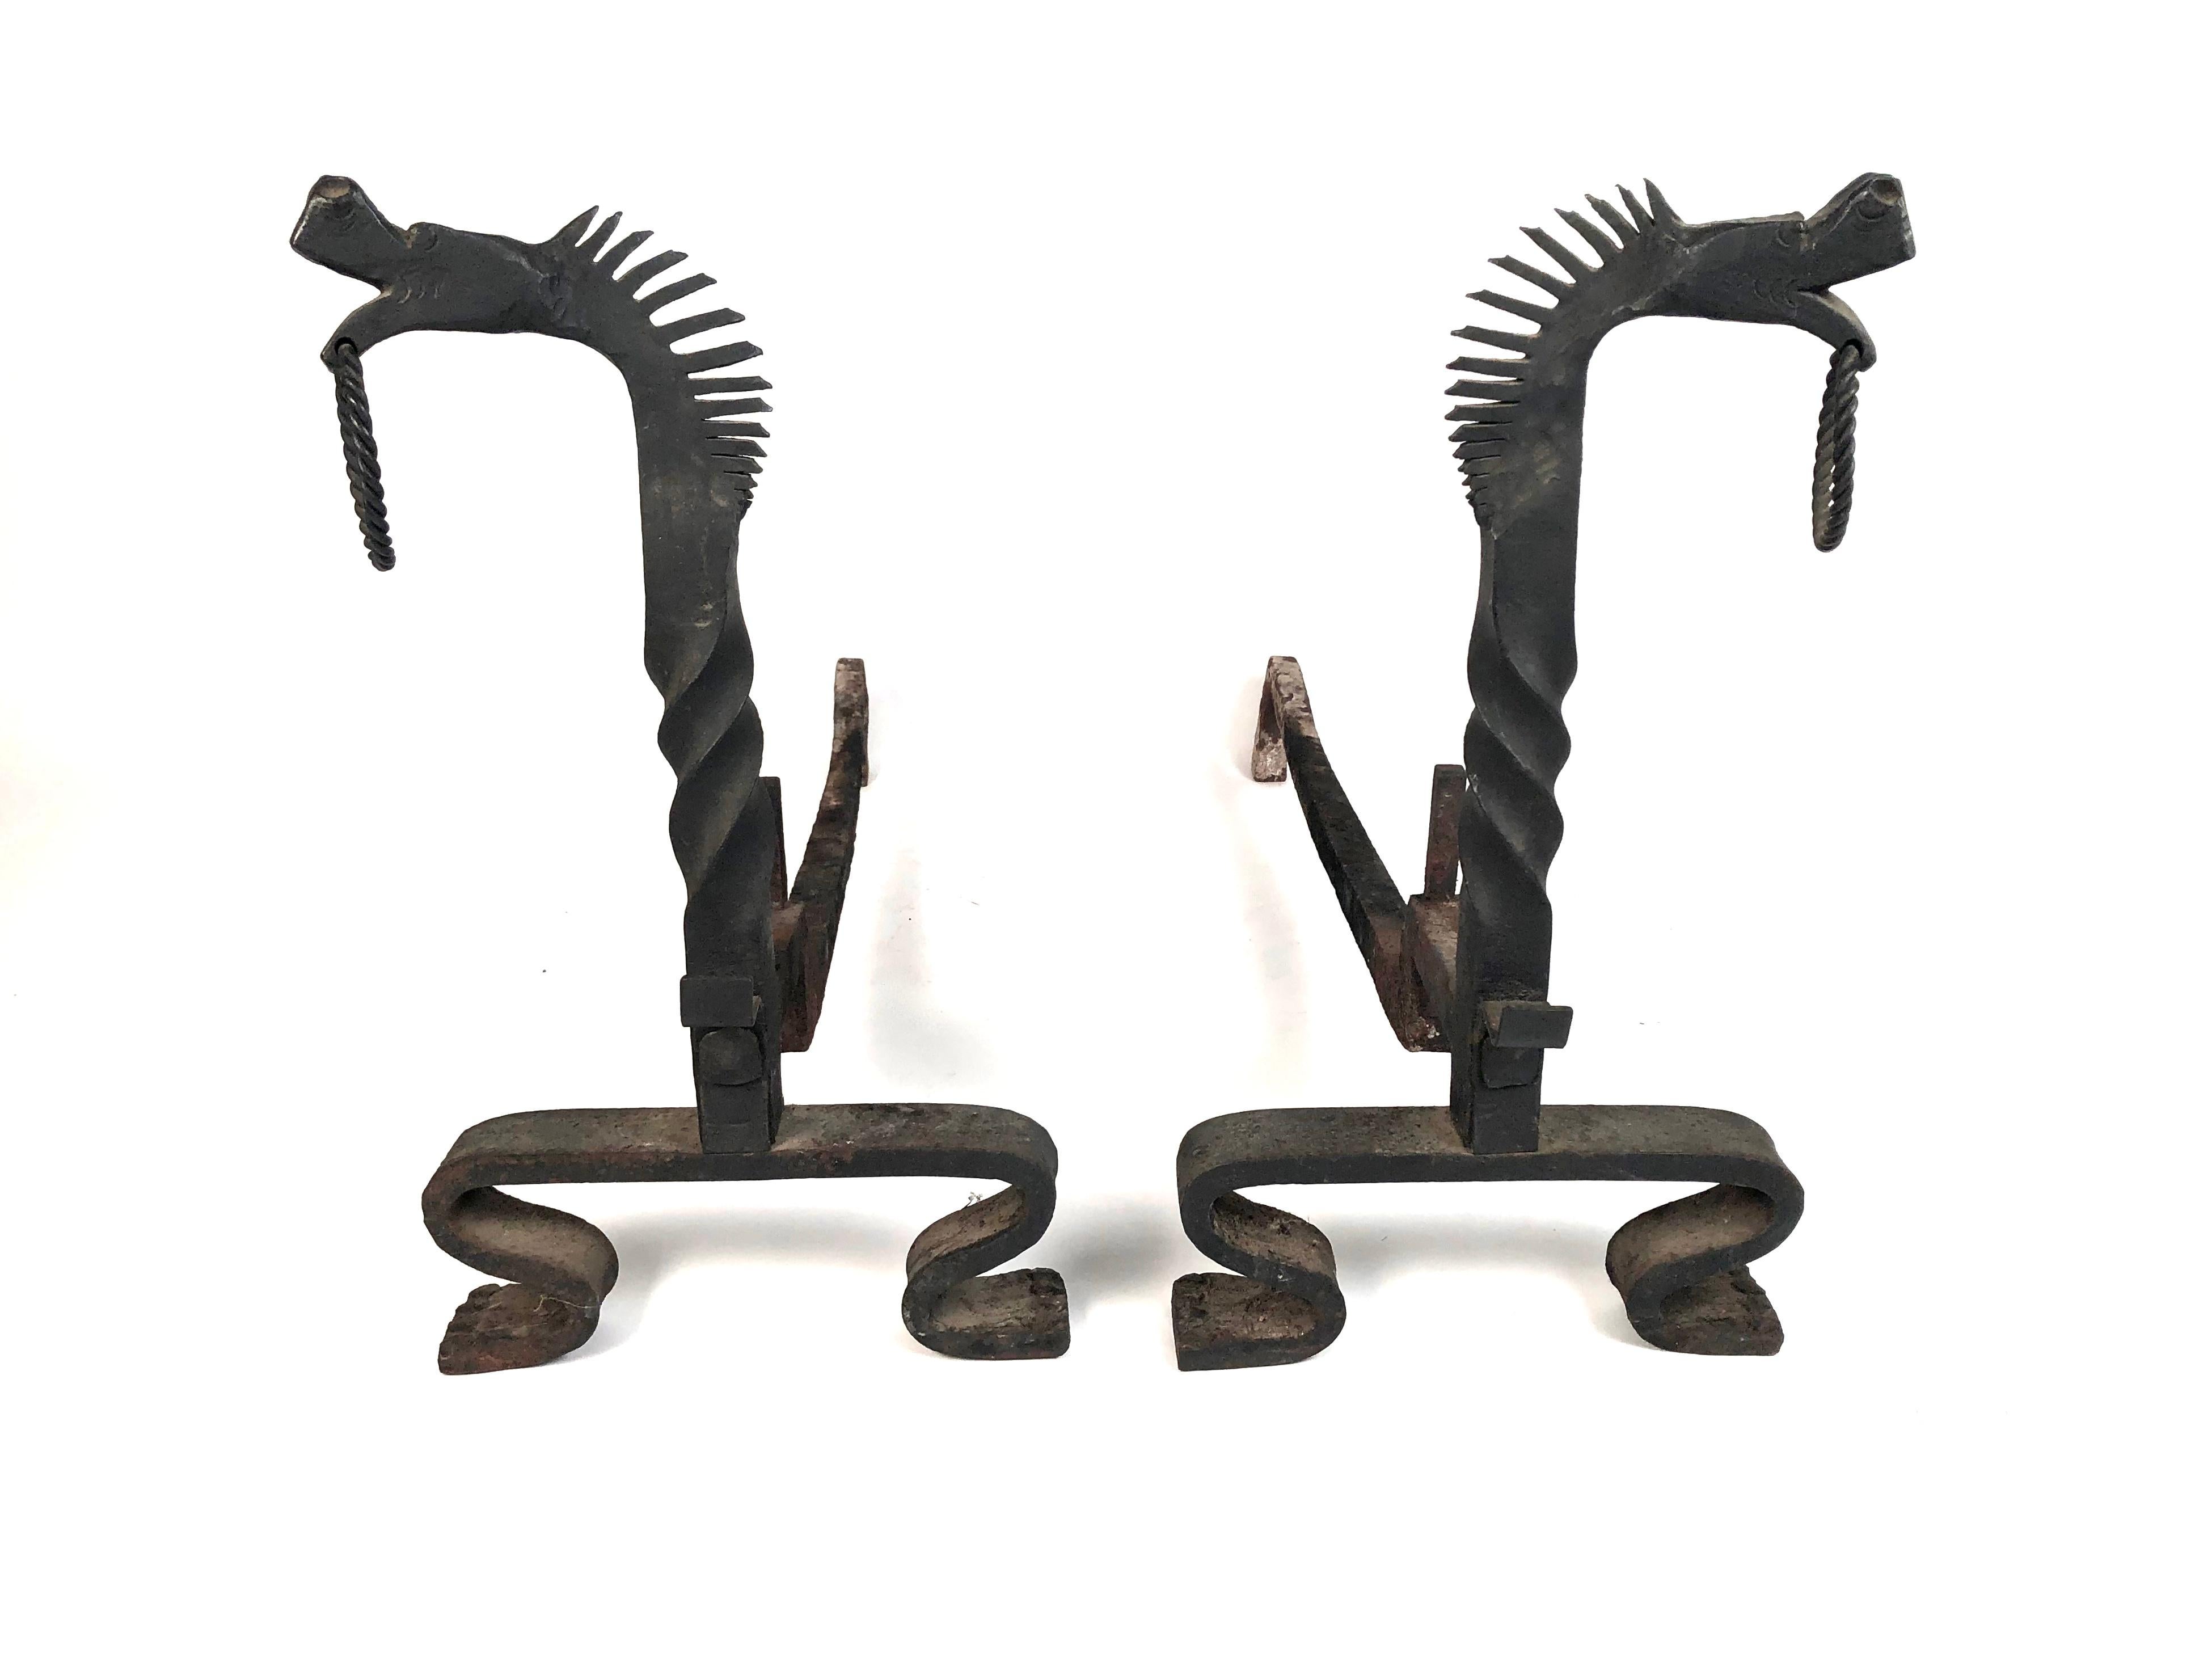 A fine quality Arts & Crafts period pair of wrought iron andirons, together with fireplace tools and jamb hooks, all beautifully modeled. The andirons have stylized dragon or horse (?) heads, with open mouths, each holding a ring, and lively manes.